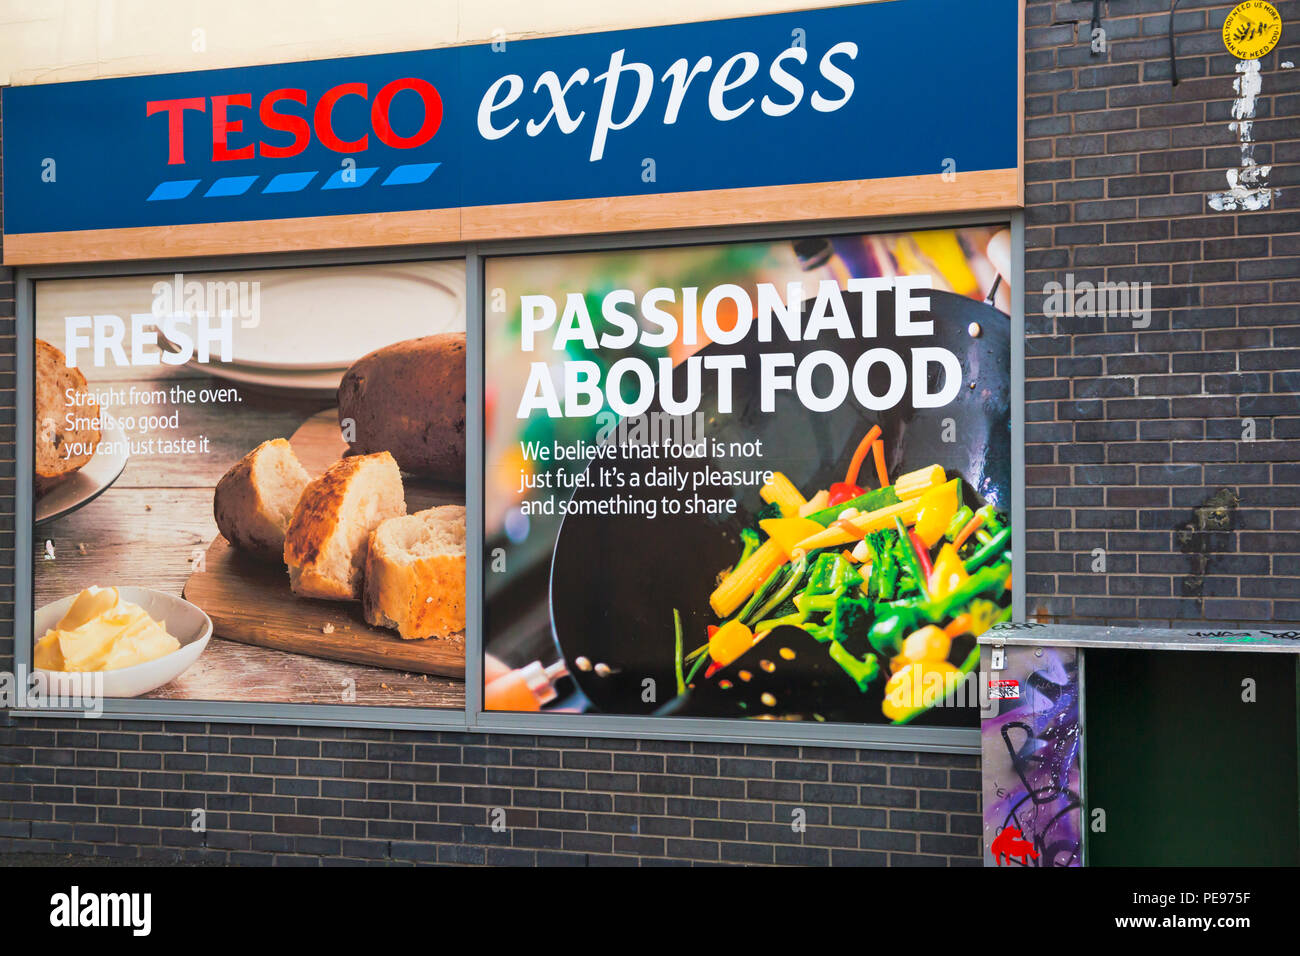 Tesco Express at North Street, Bedminster, Bristol on a wet rainy day  in August - passionate about food Stock Photo